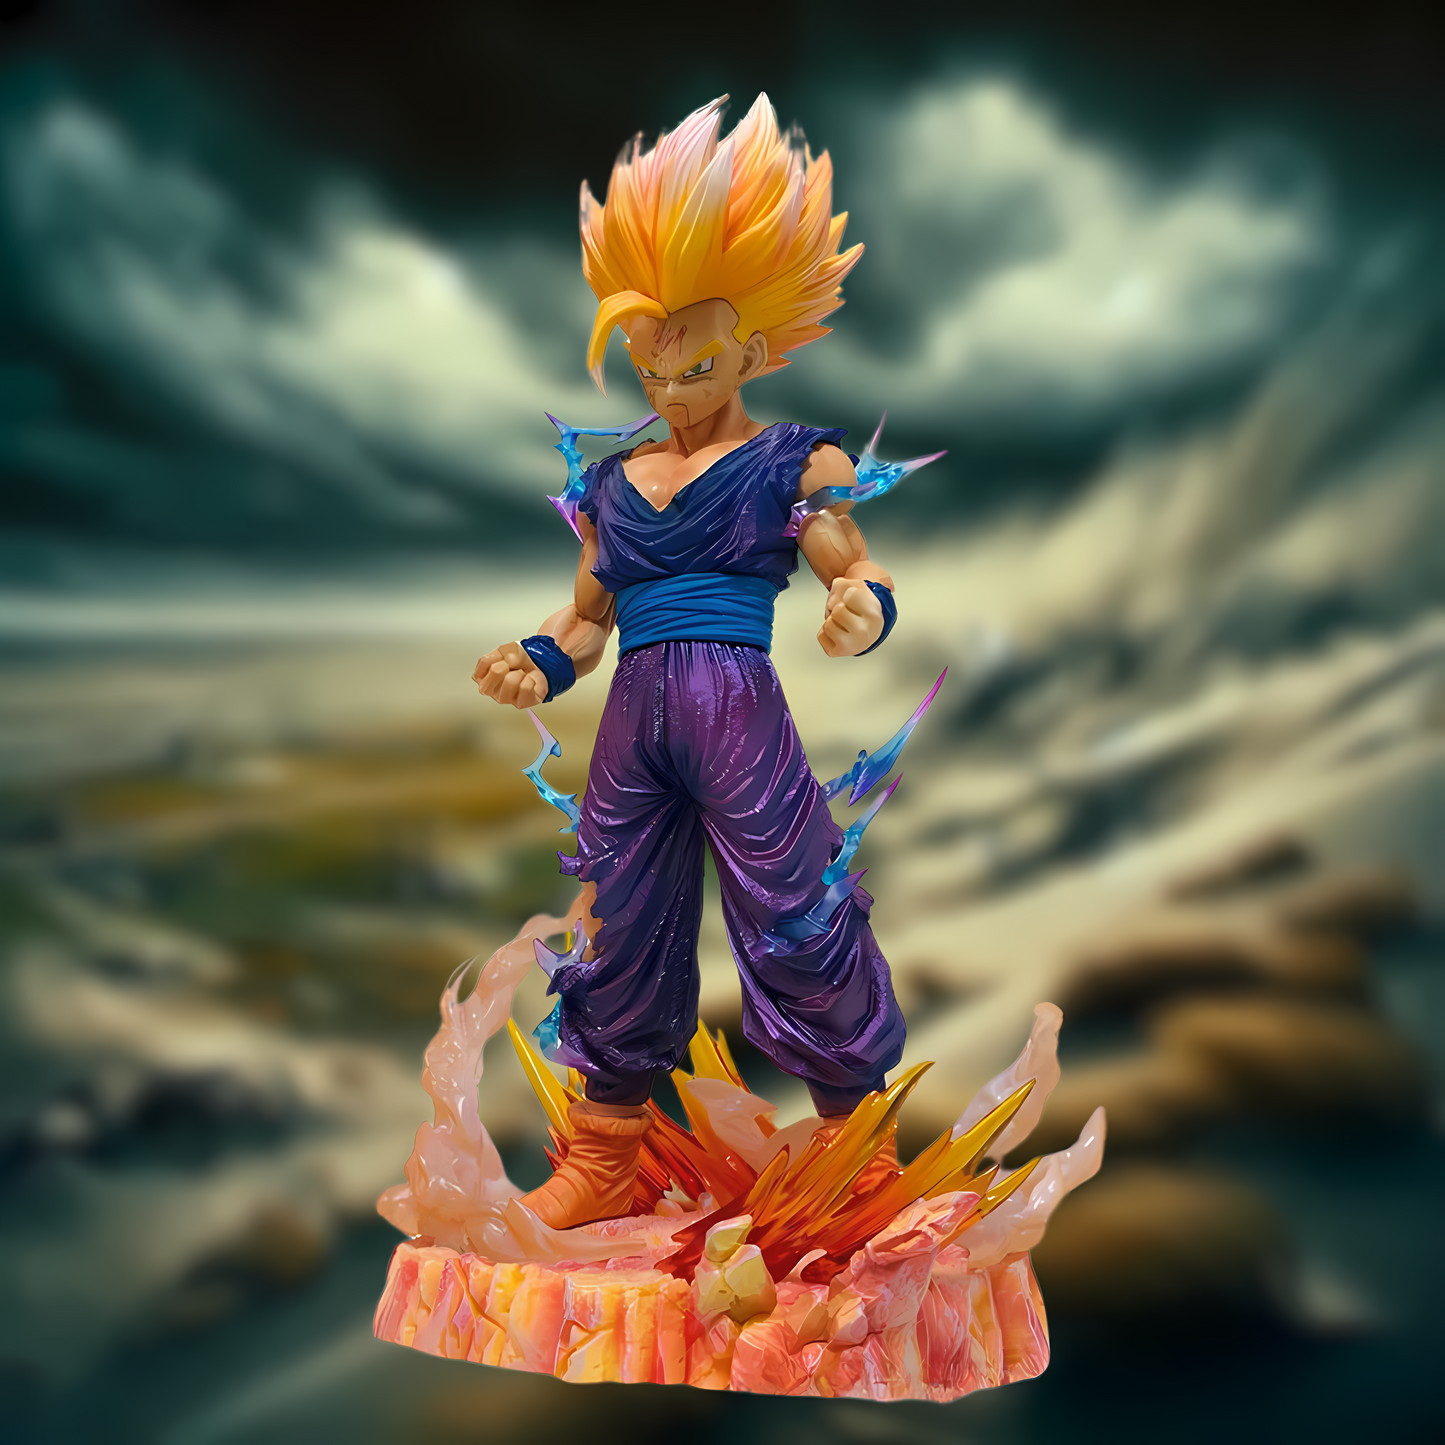 The Gohan figure in a powerful stance, energy crackling around him, demonstrating his readiness for combat, all enhanced by the swirling clouds in the backdrop.